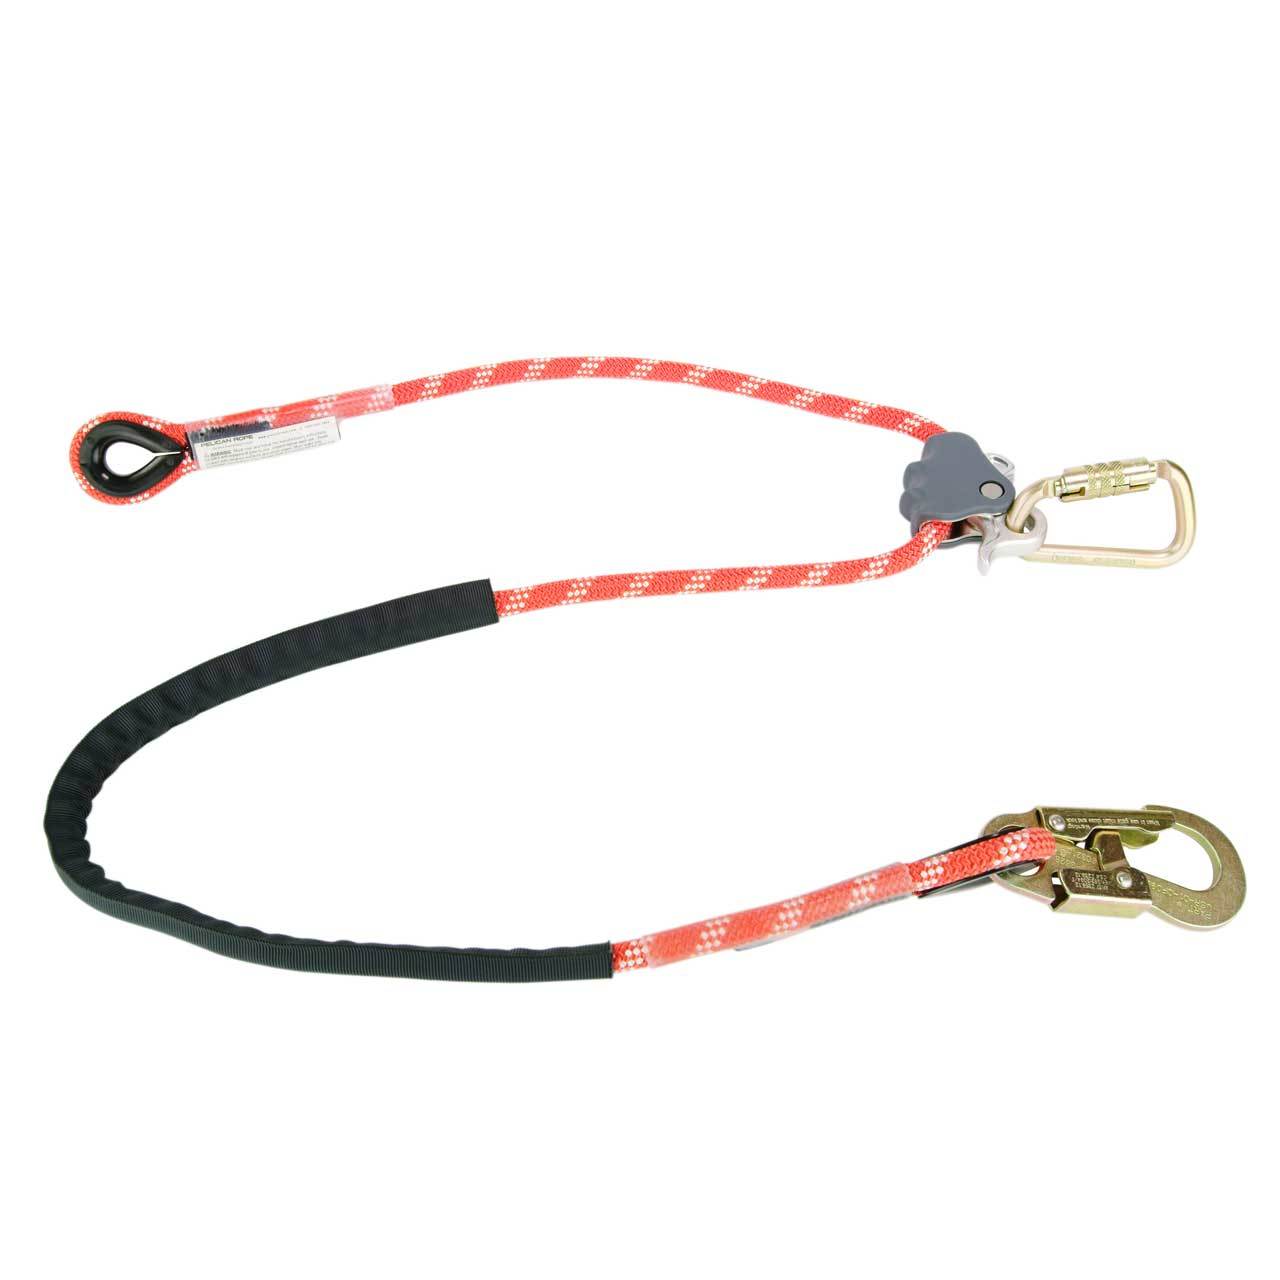 Pelican Hooks Fall Protection User Manual